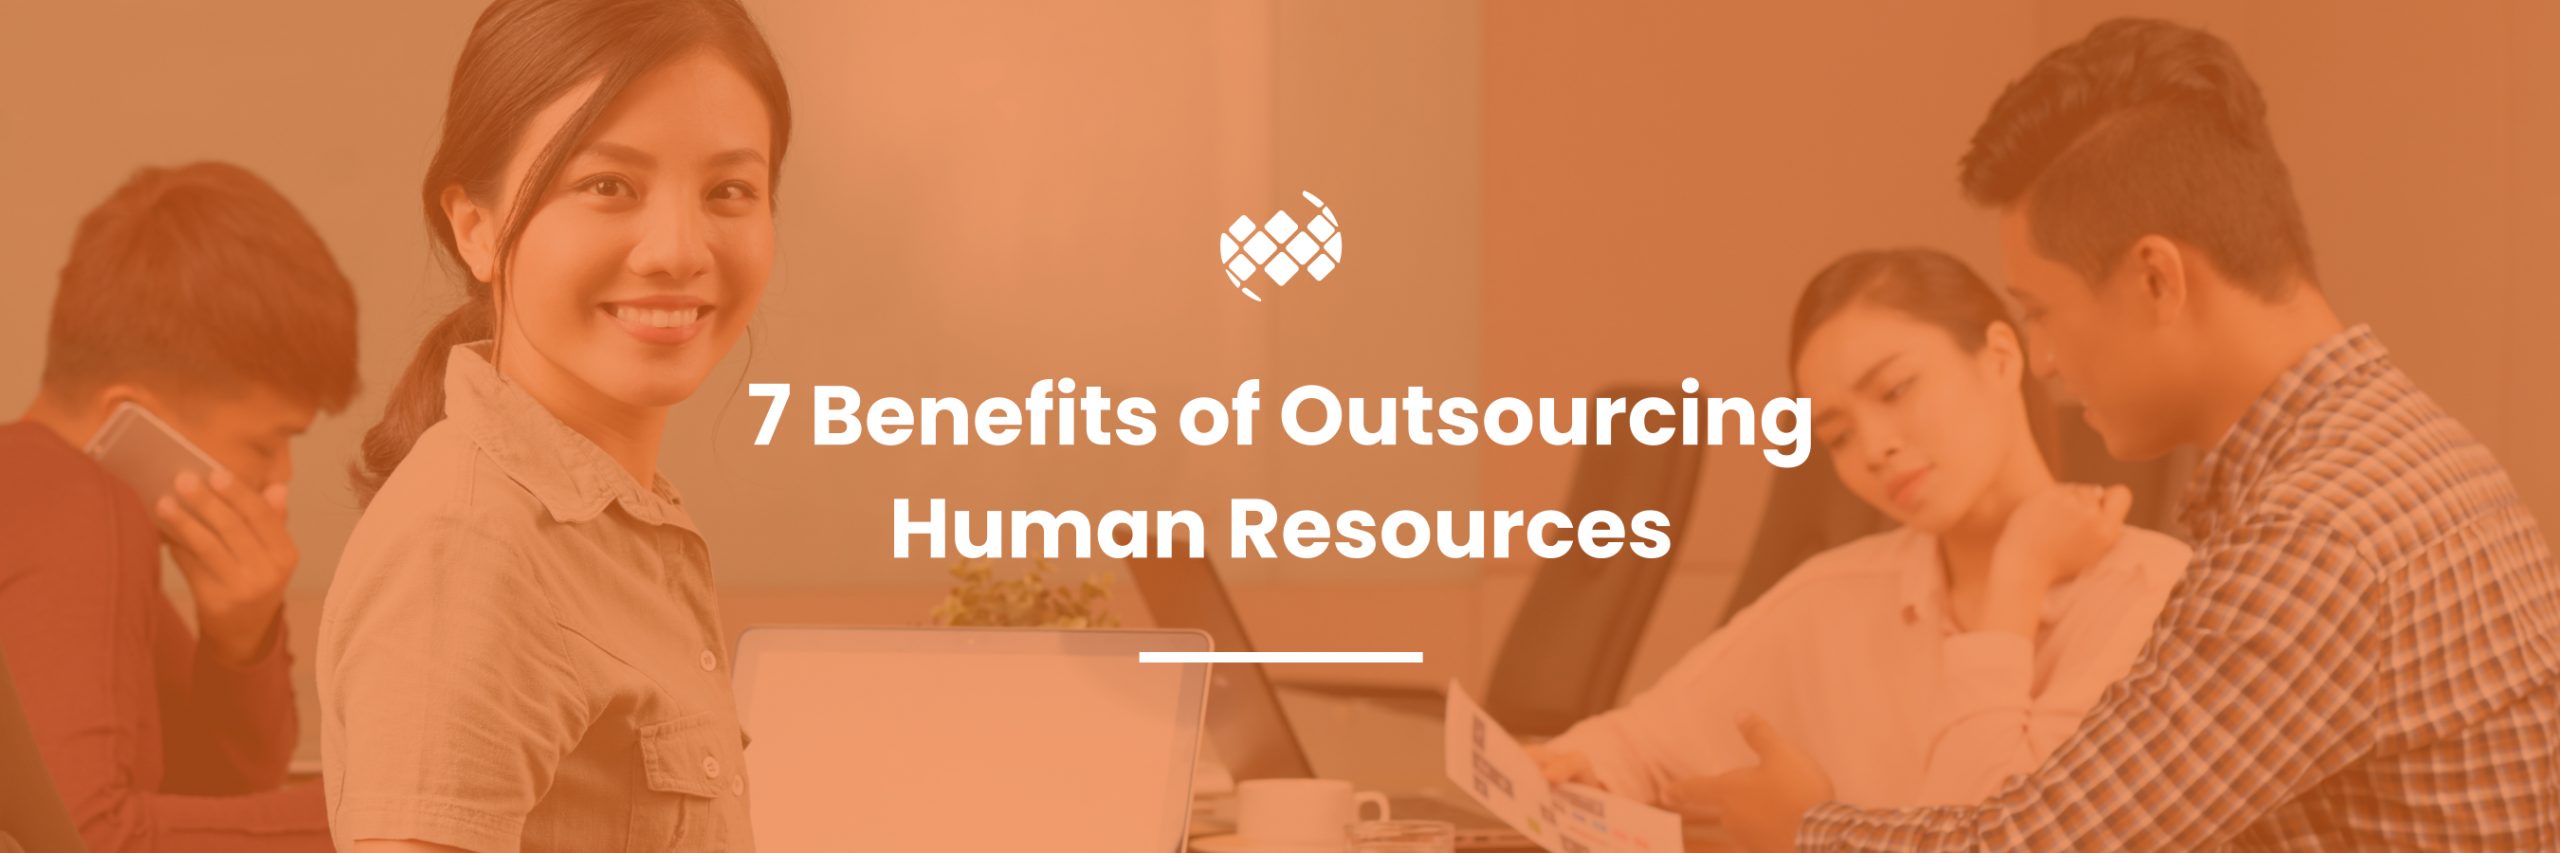 Benefits of Outsourcing Human Resources